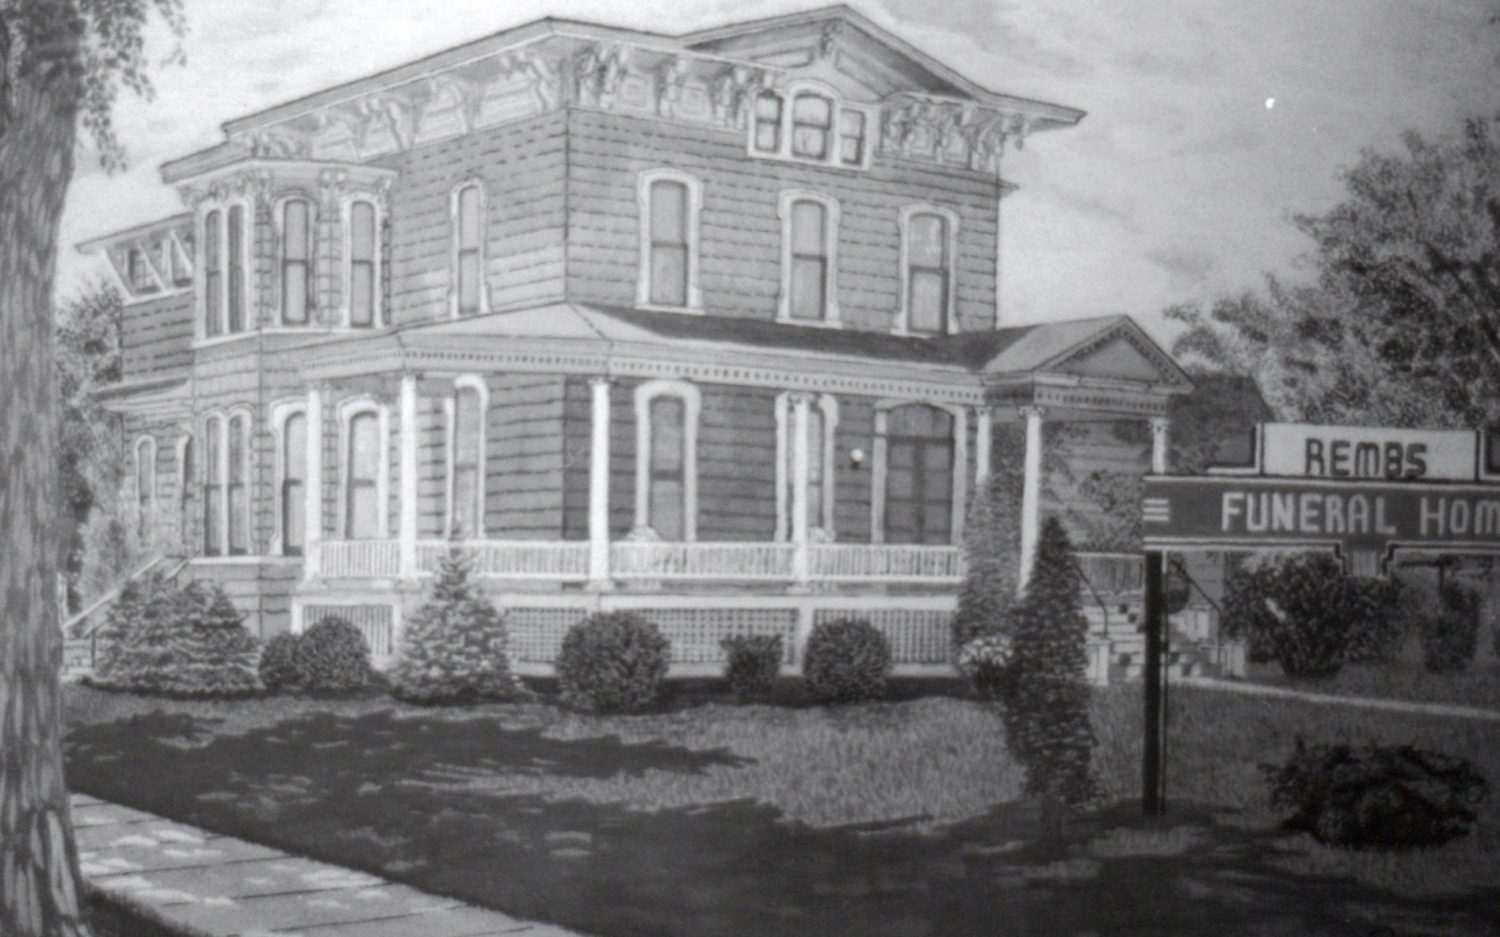 The company of Rembs, Baer, and Lange opened a state-of-the-art funeral home on the corner of Fourth Street and Chestnut Avenue following a complete remodeling of what was once the residence of Frank Upham in 1937.